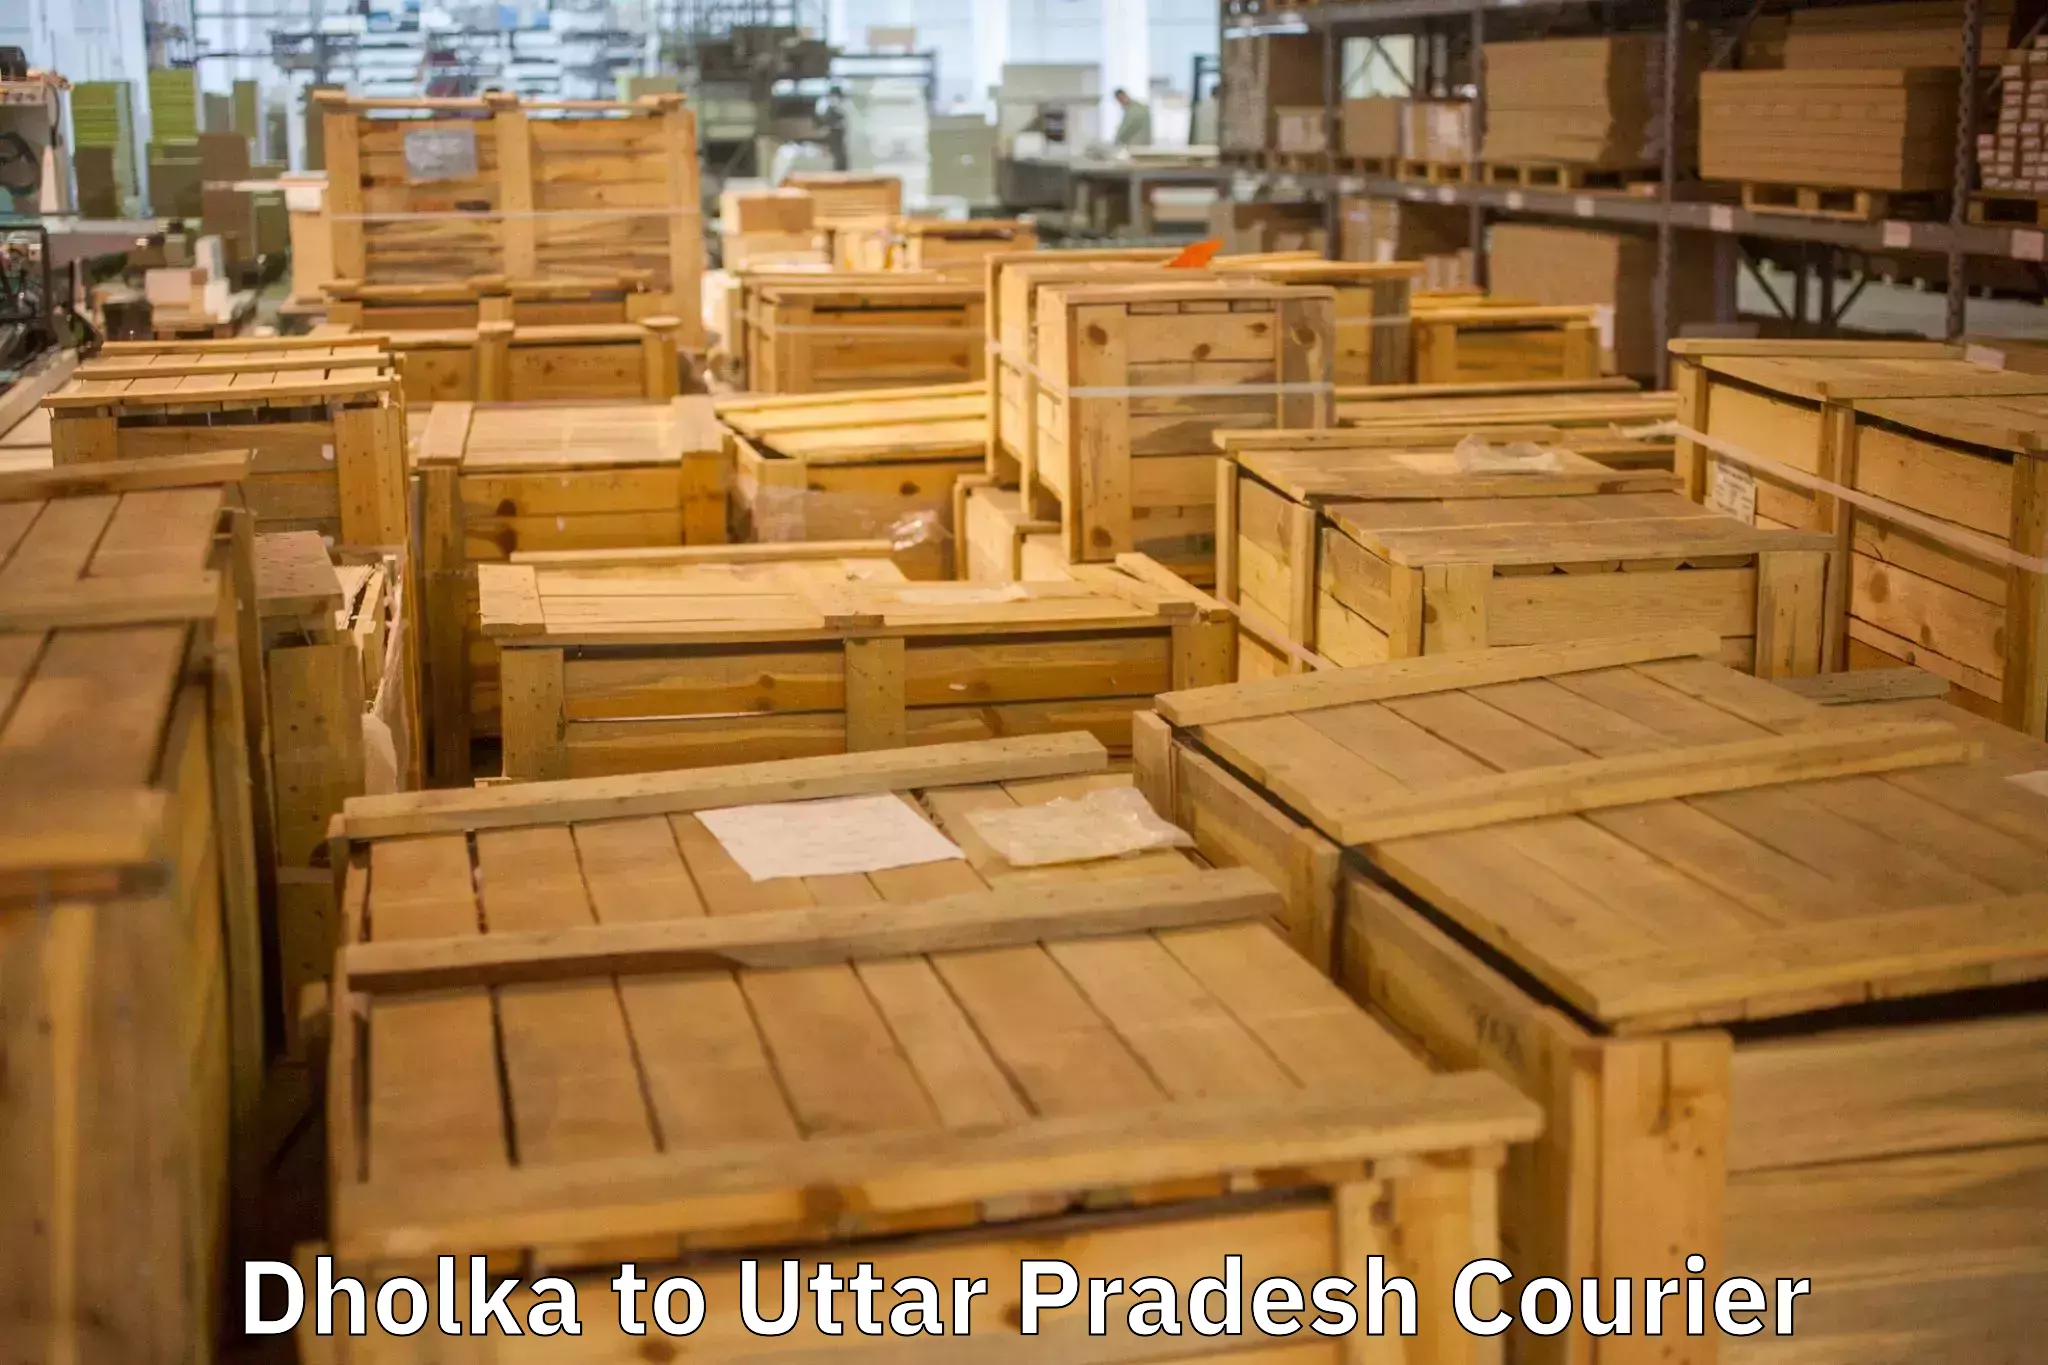 Trusted moving company Dholka to Tilhar